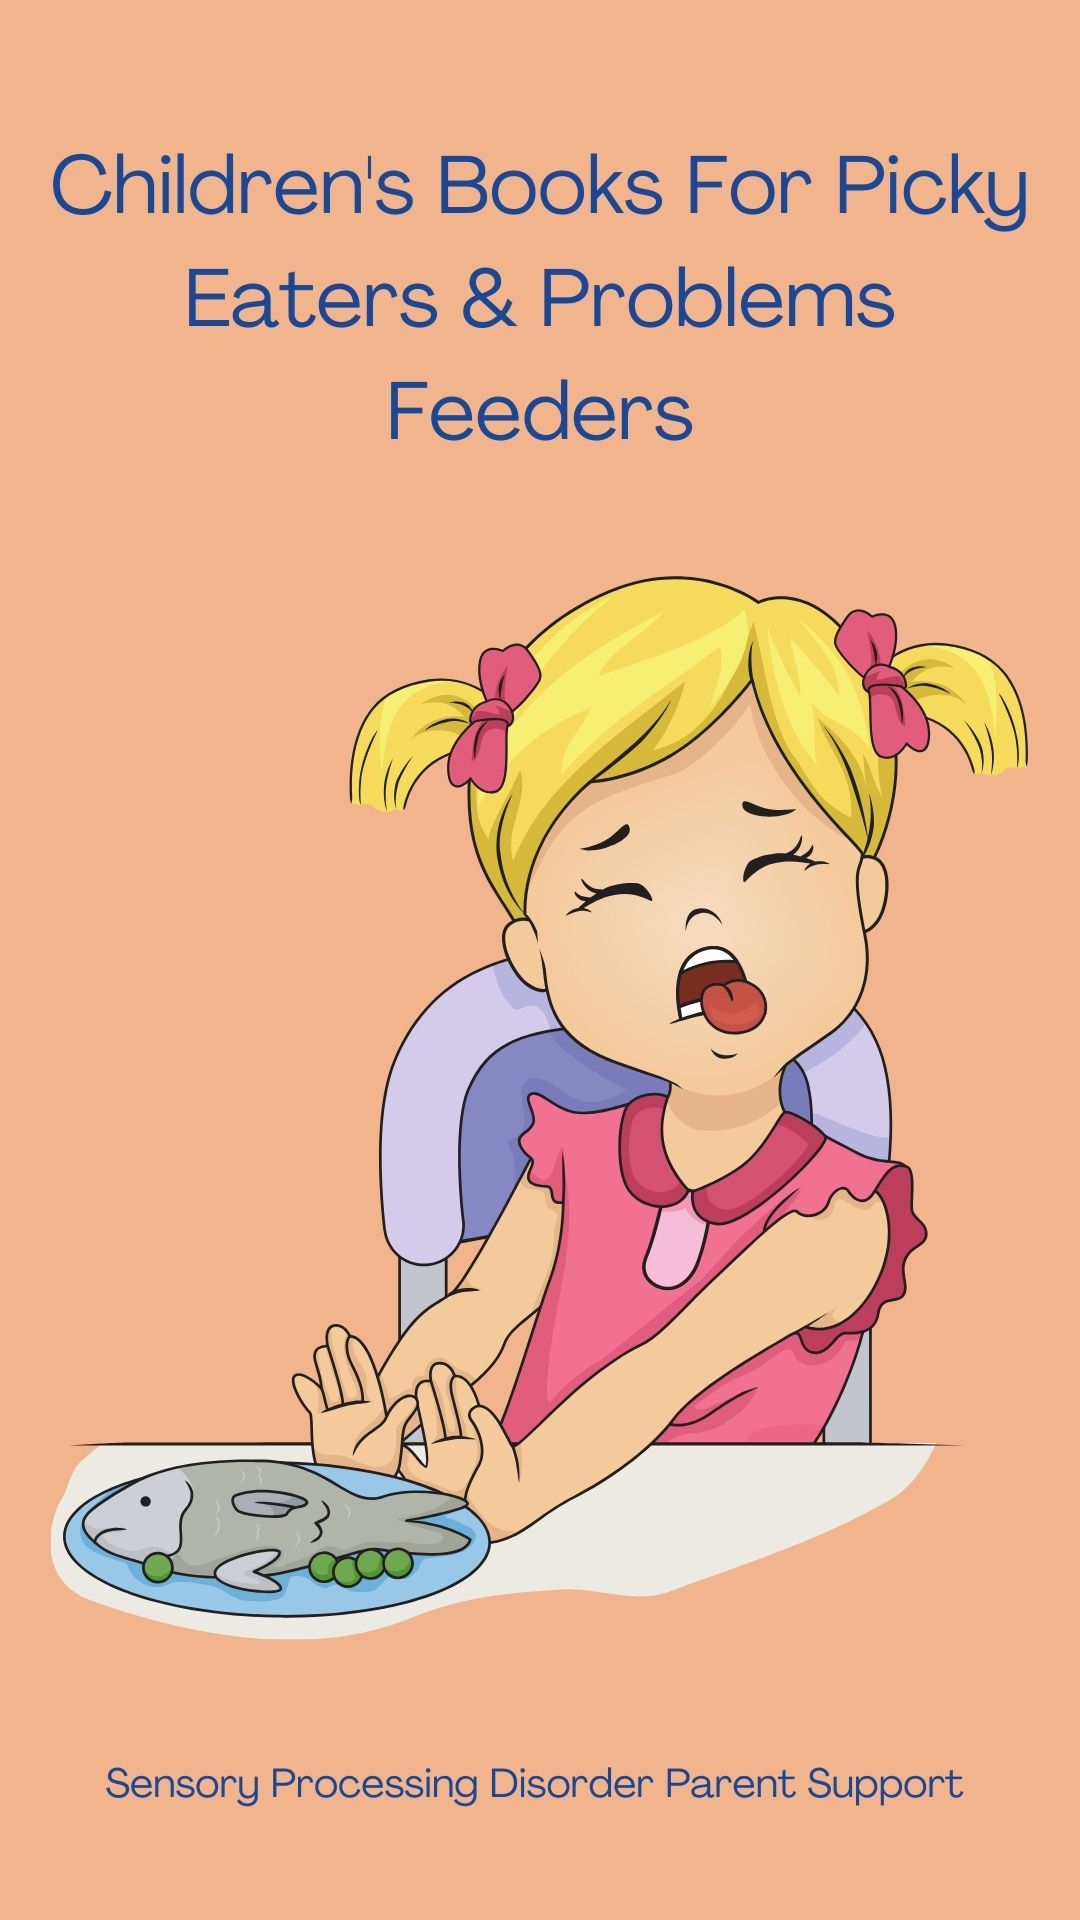 Children's Books For Picky Eaters & Problems Feeders